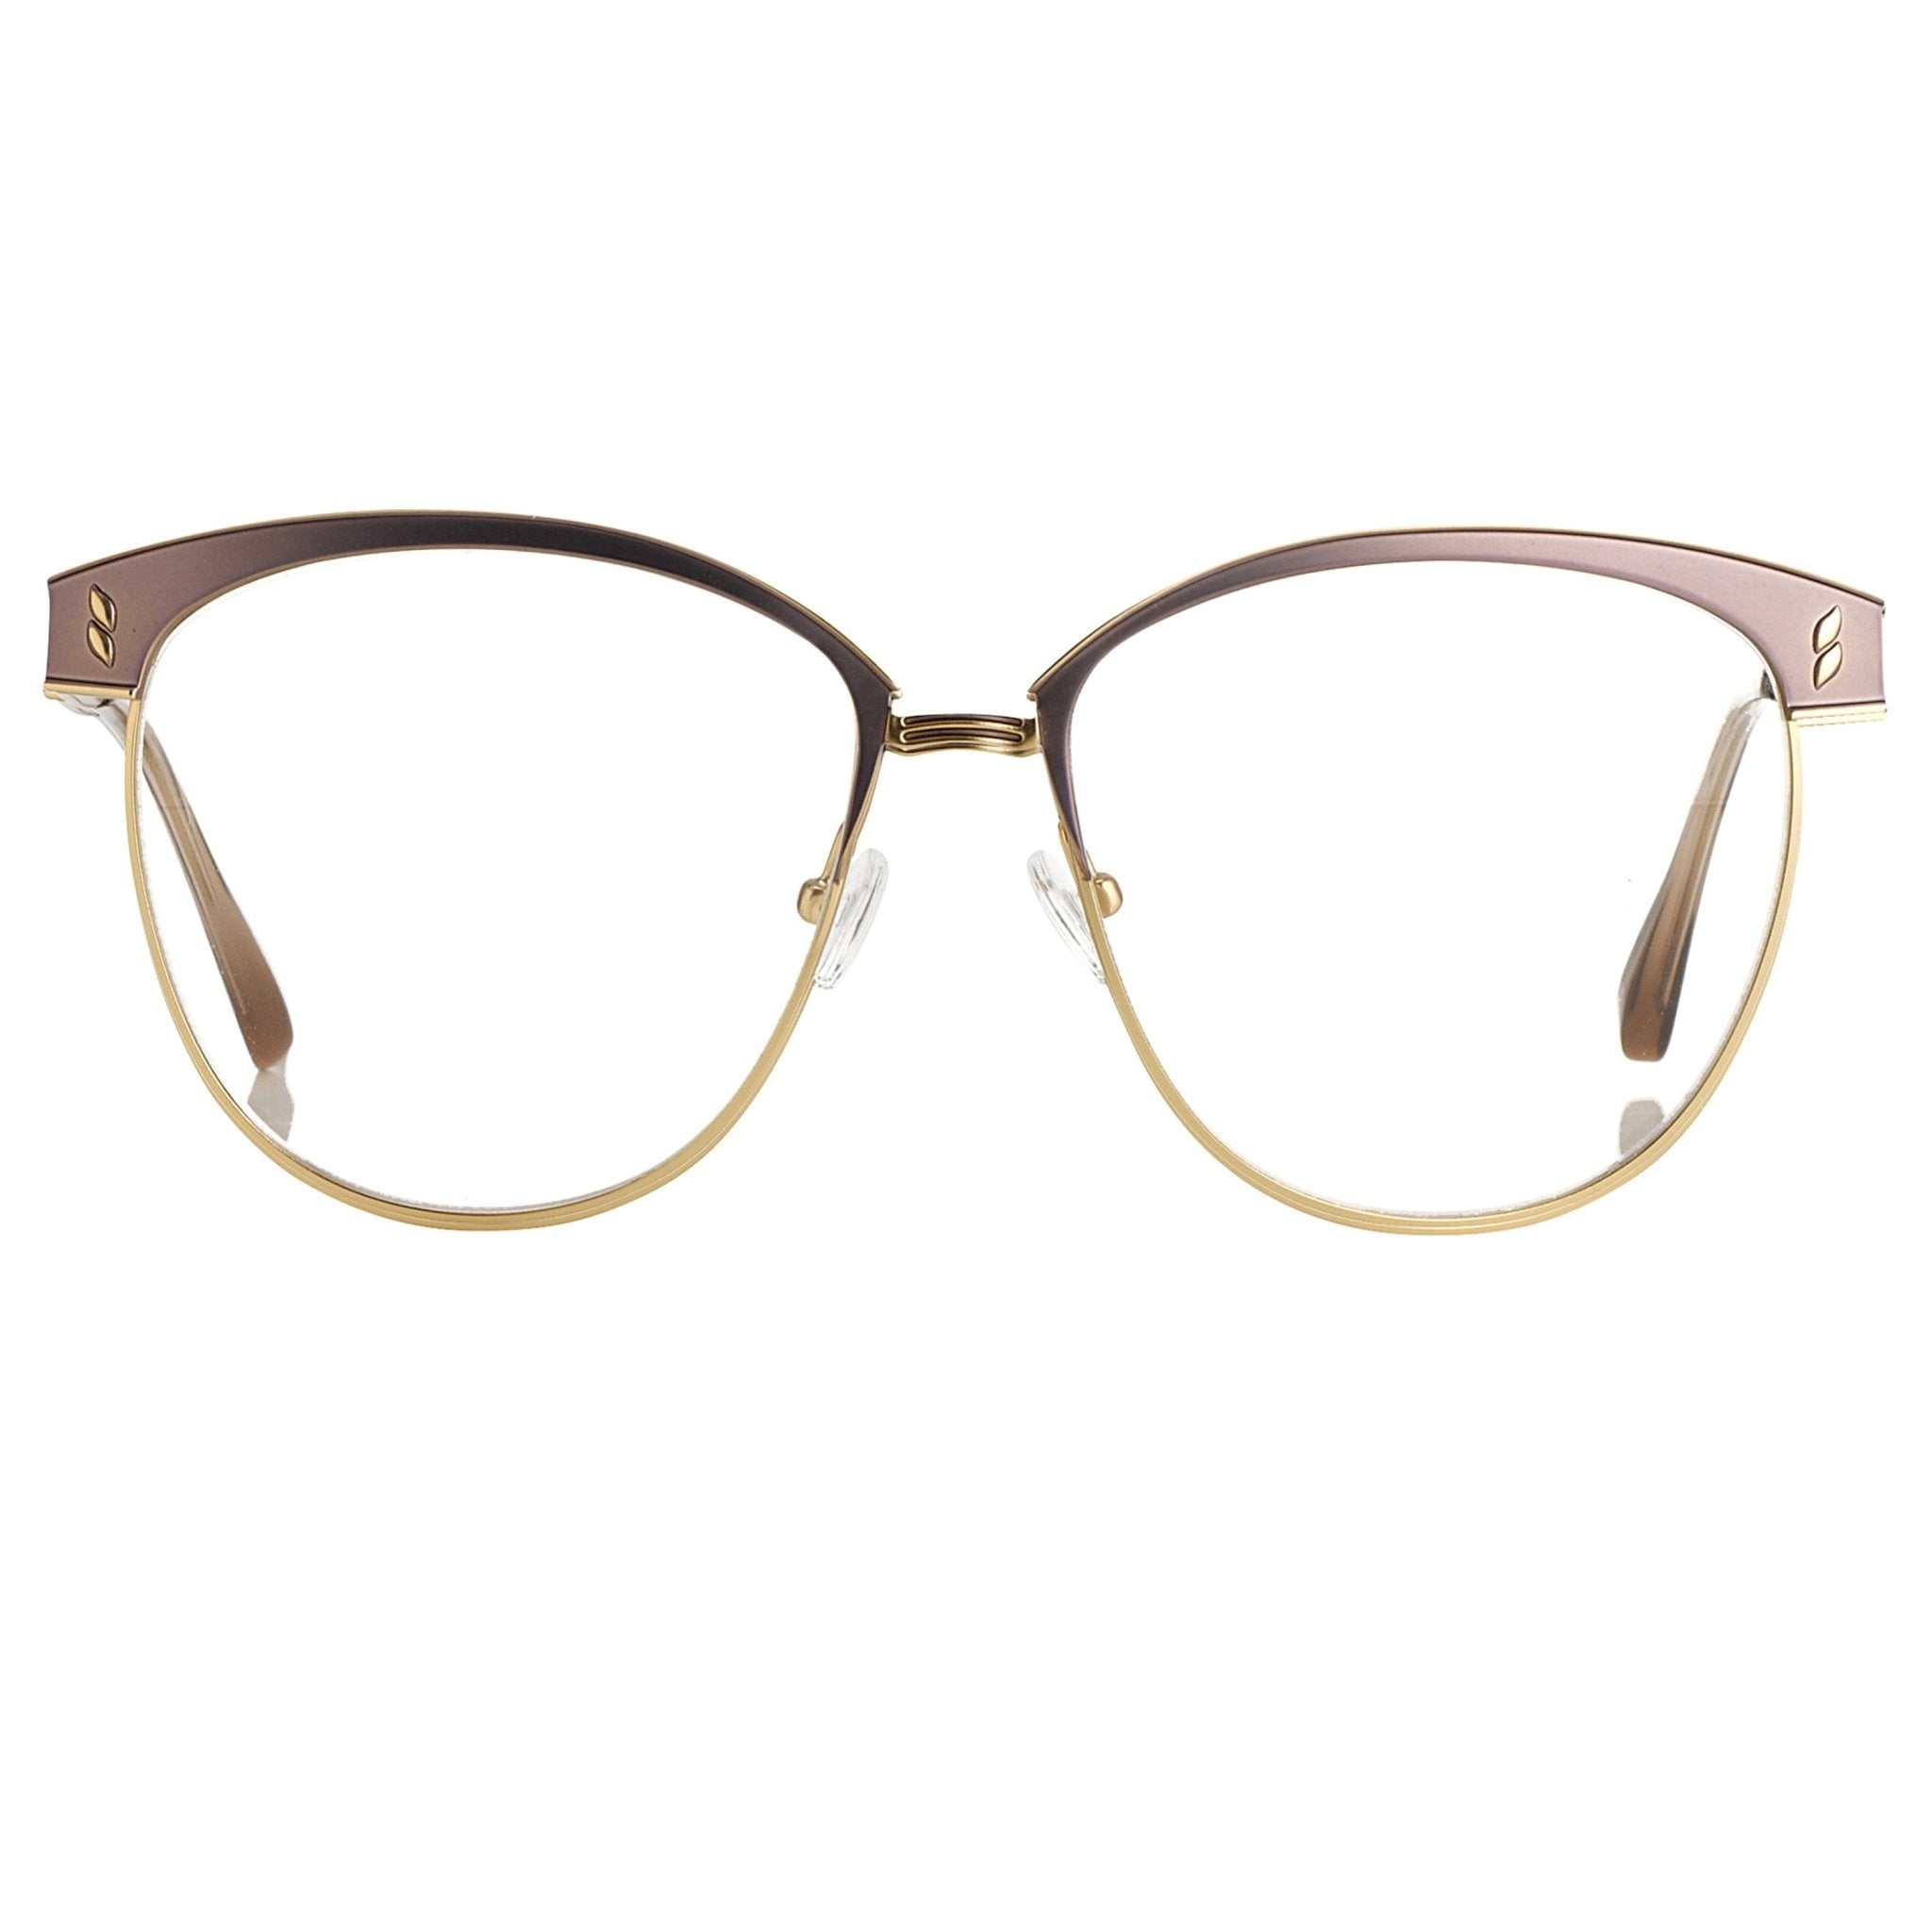 Agent Provocateur Eyeglasses Oval Brown/Gold - Watches & Crystals